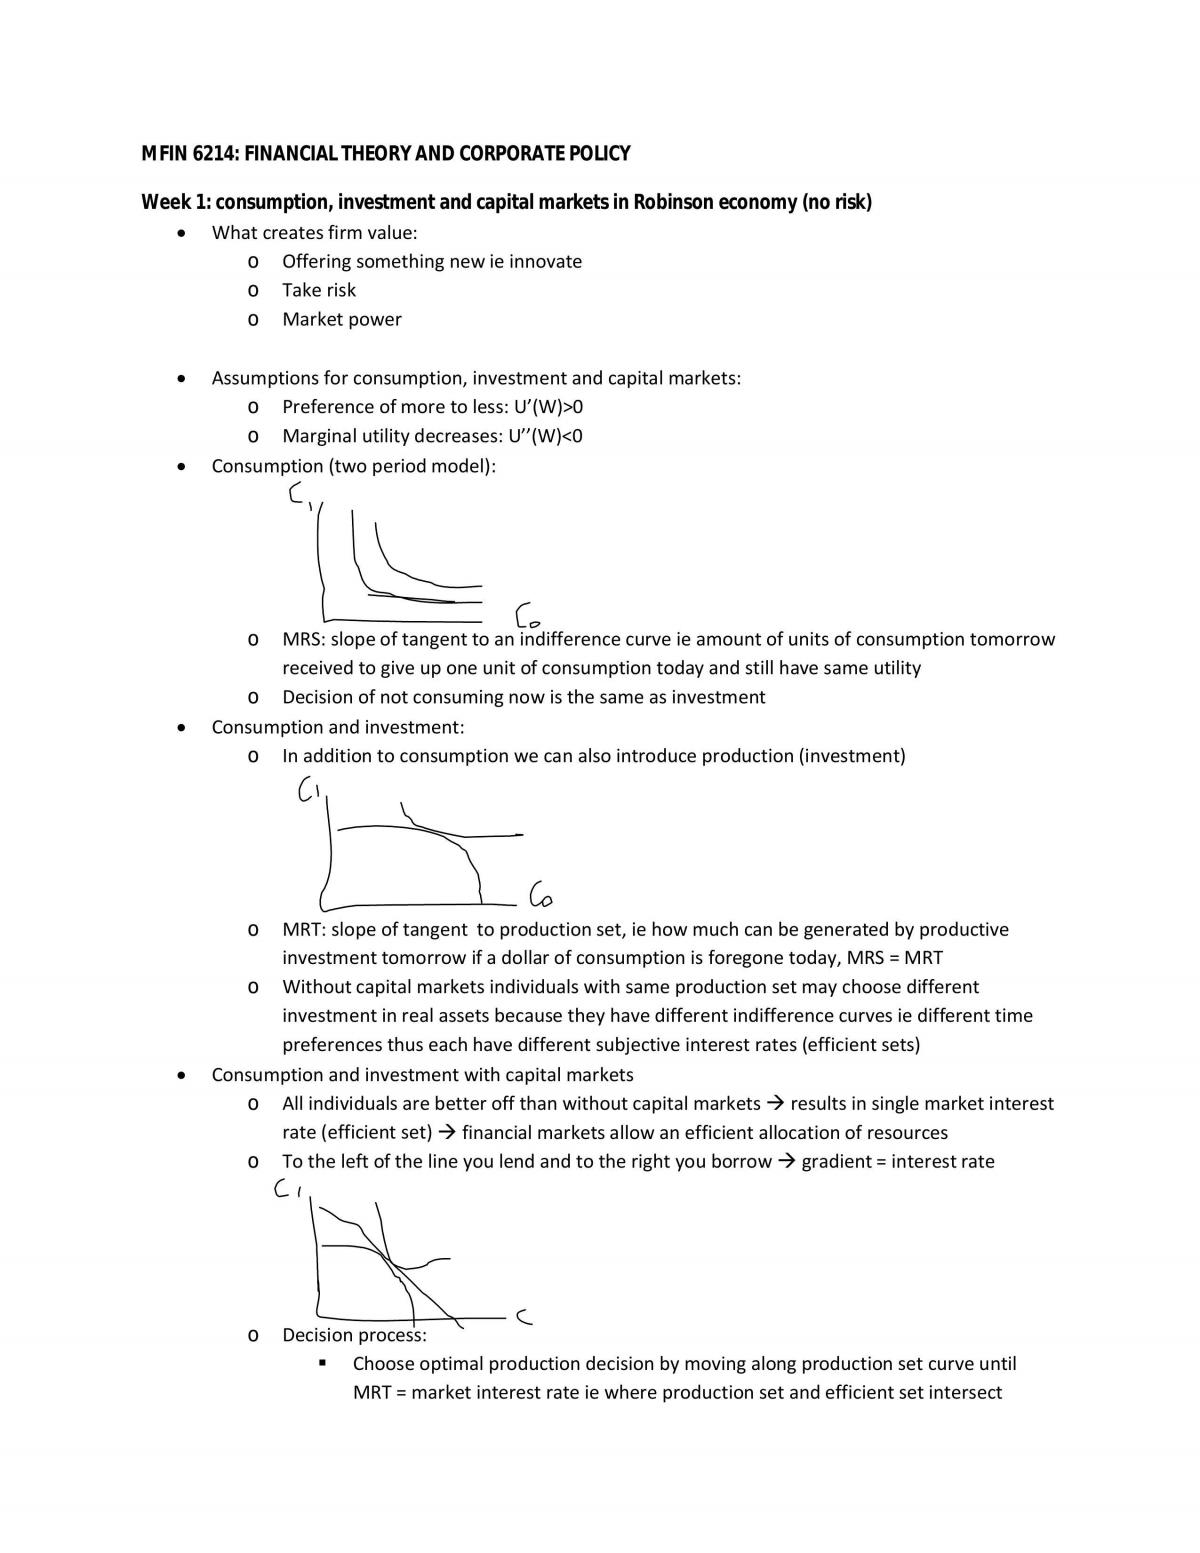 MFIN6214 - Study Notes - Page 1